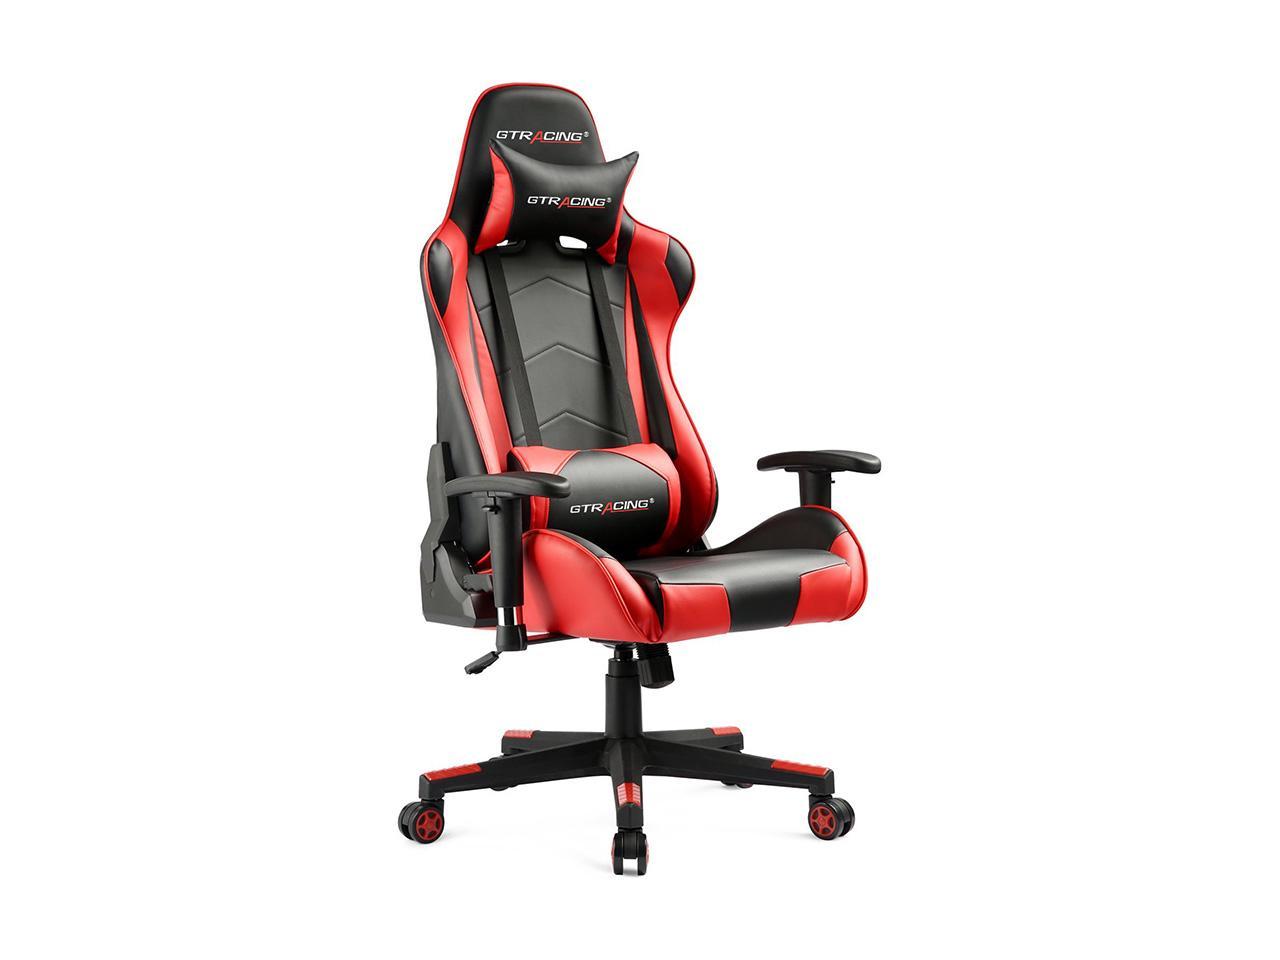 E-SPORTS Gaming Chair Office Executive Chair Heavy Duty GTRACING 